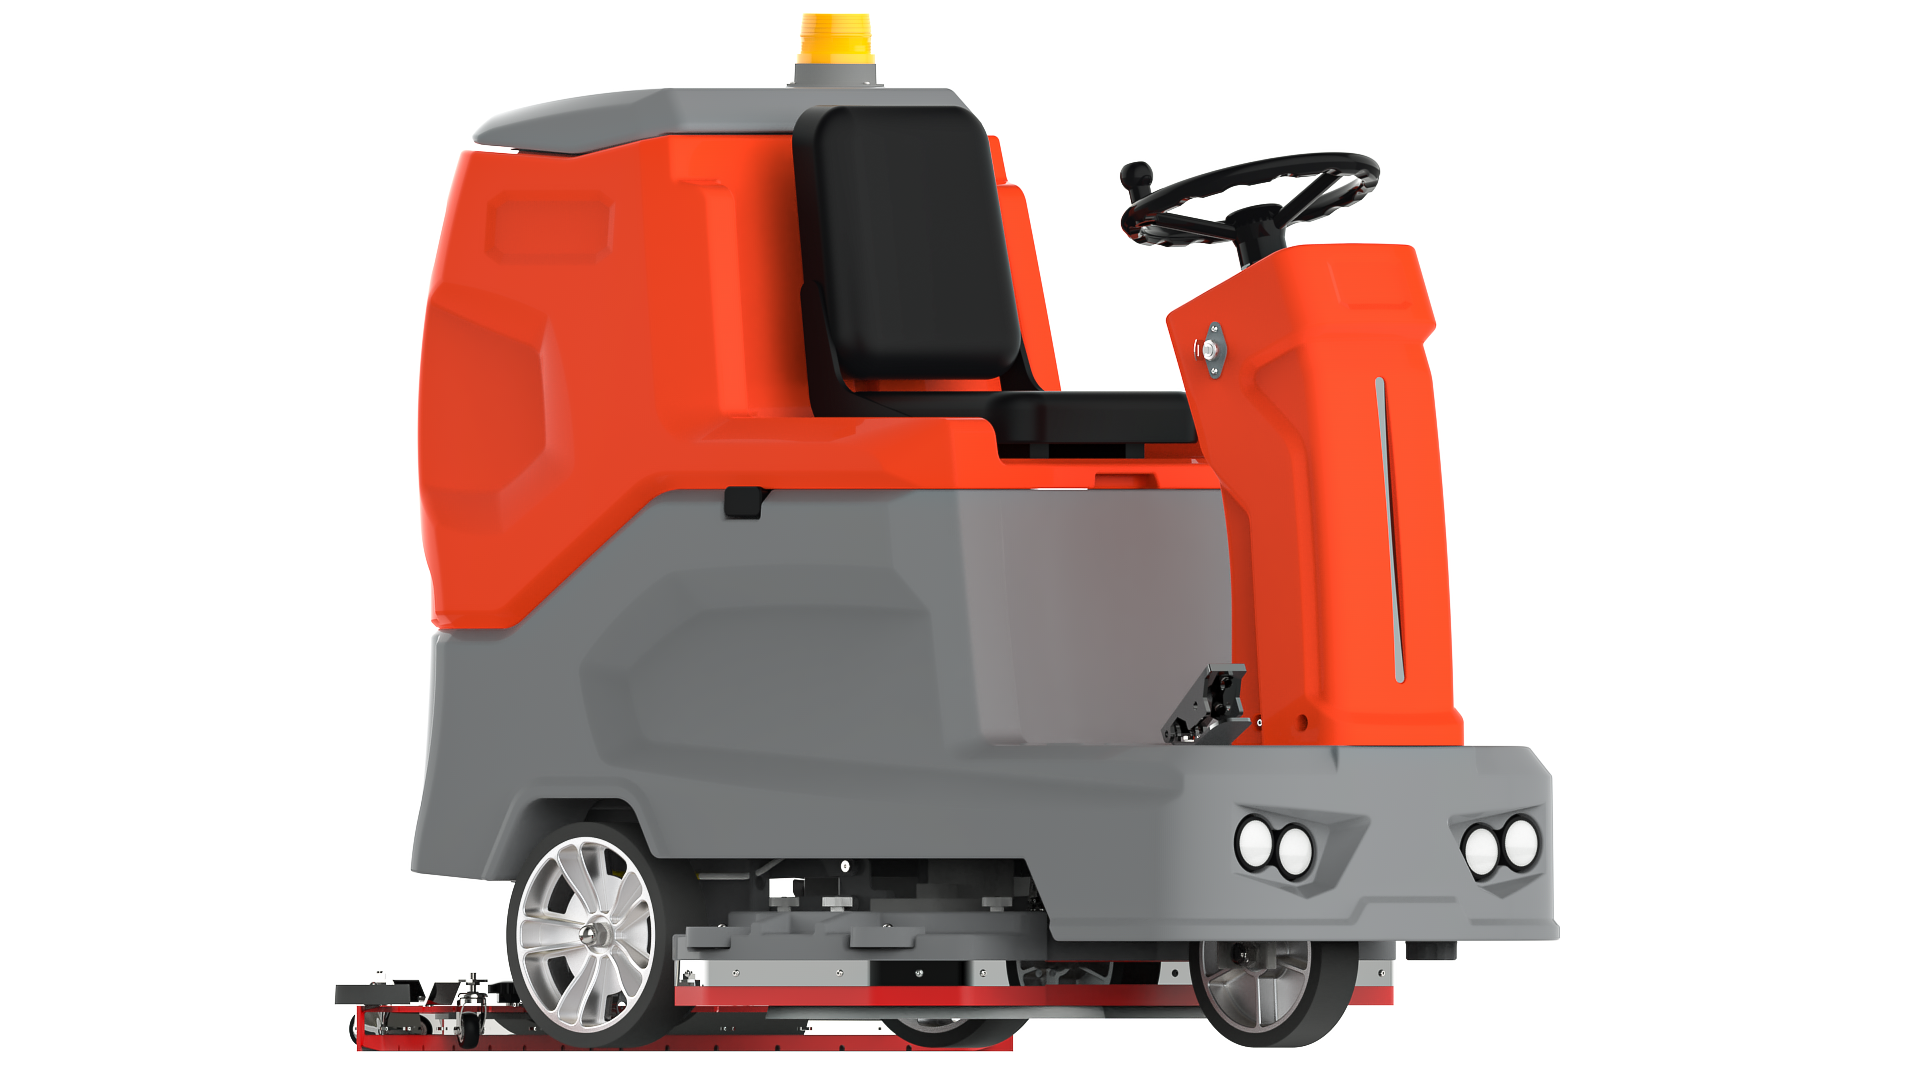 Sweet Pastry in Commercial & Industry Cleaning: The R-X900 Ride-On Floor Scrubber